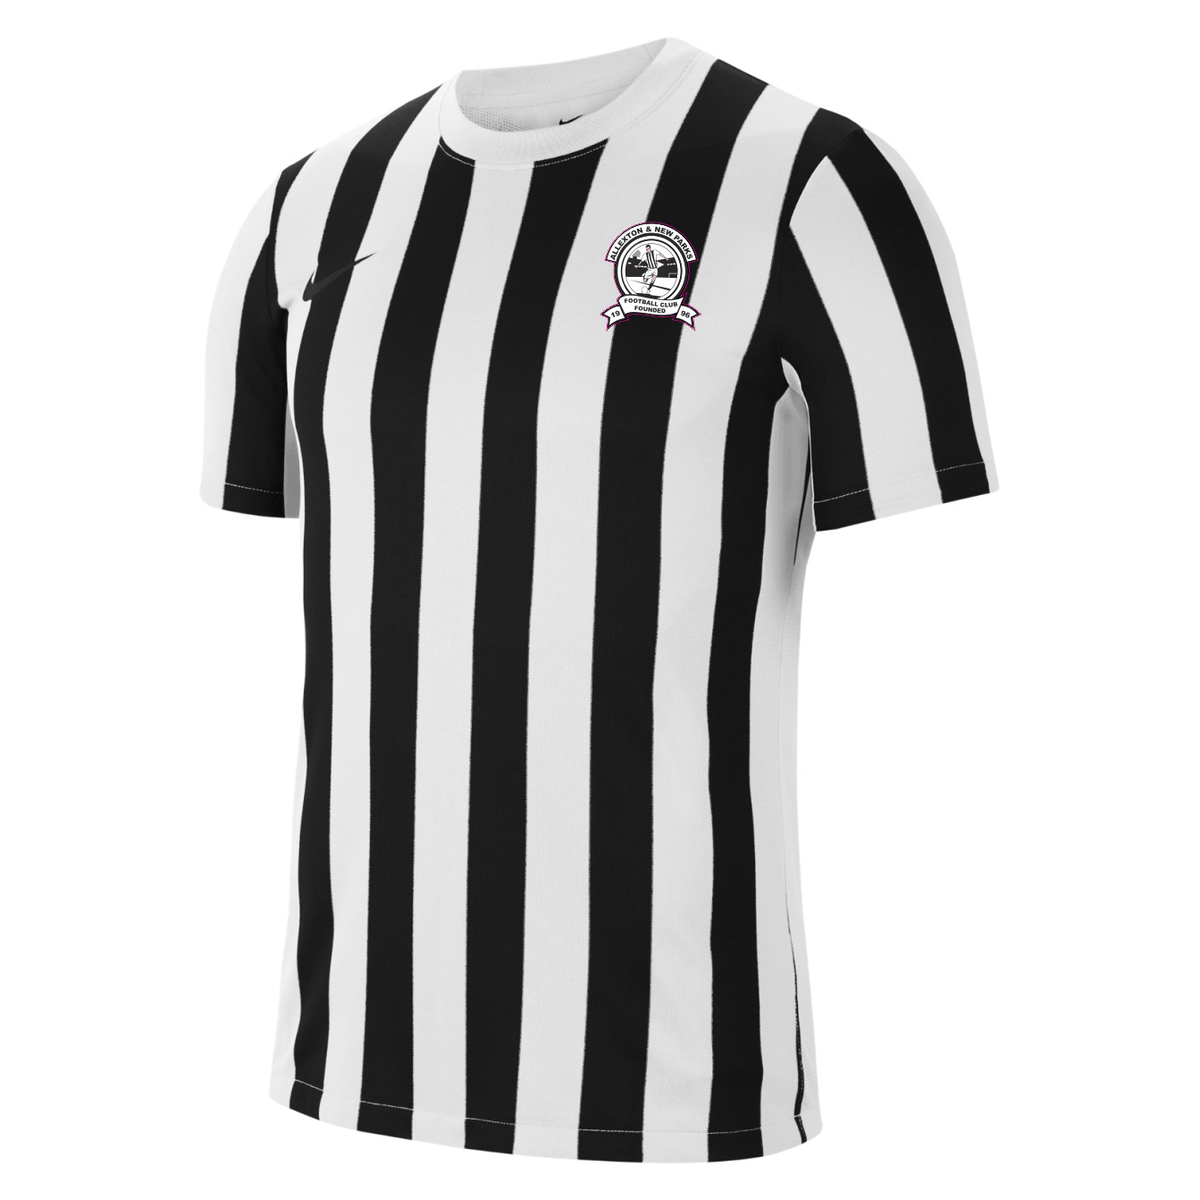 Allexton & New Parks - Striped Division IV Jersey